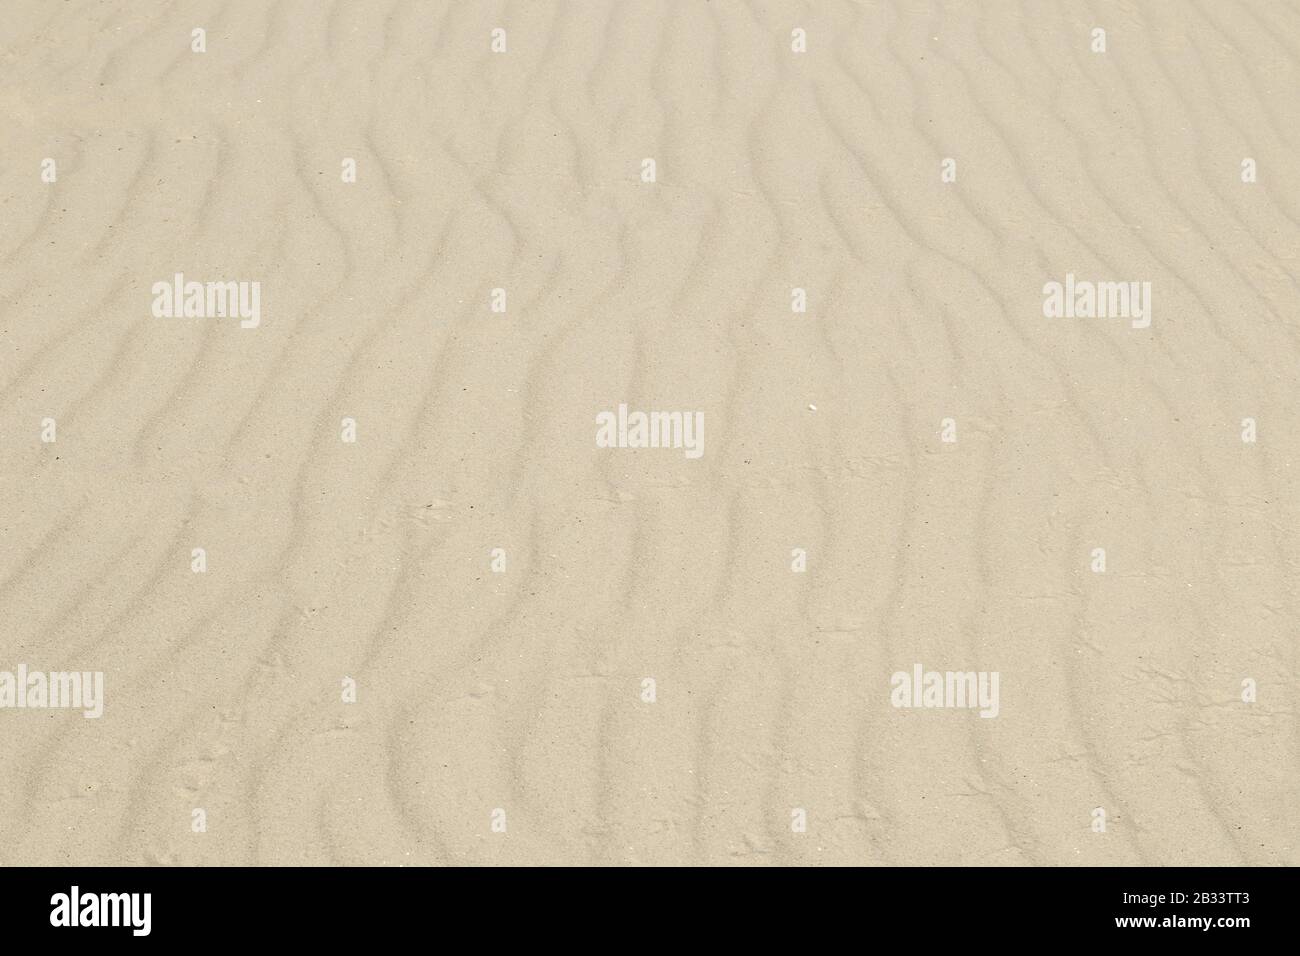 Sand dunes close-up macro nature. White and yellow sand natural texture background Stock Photo